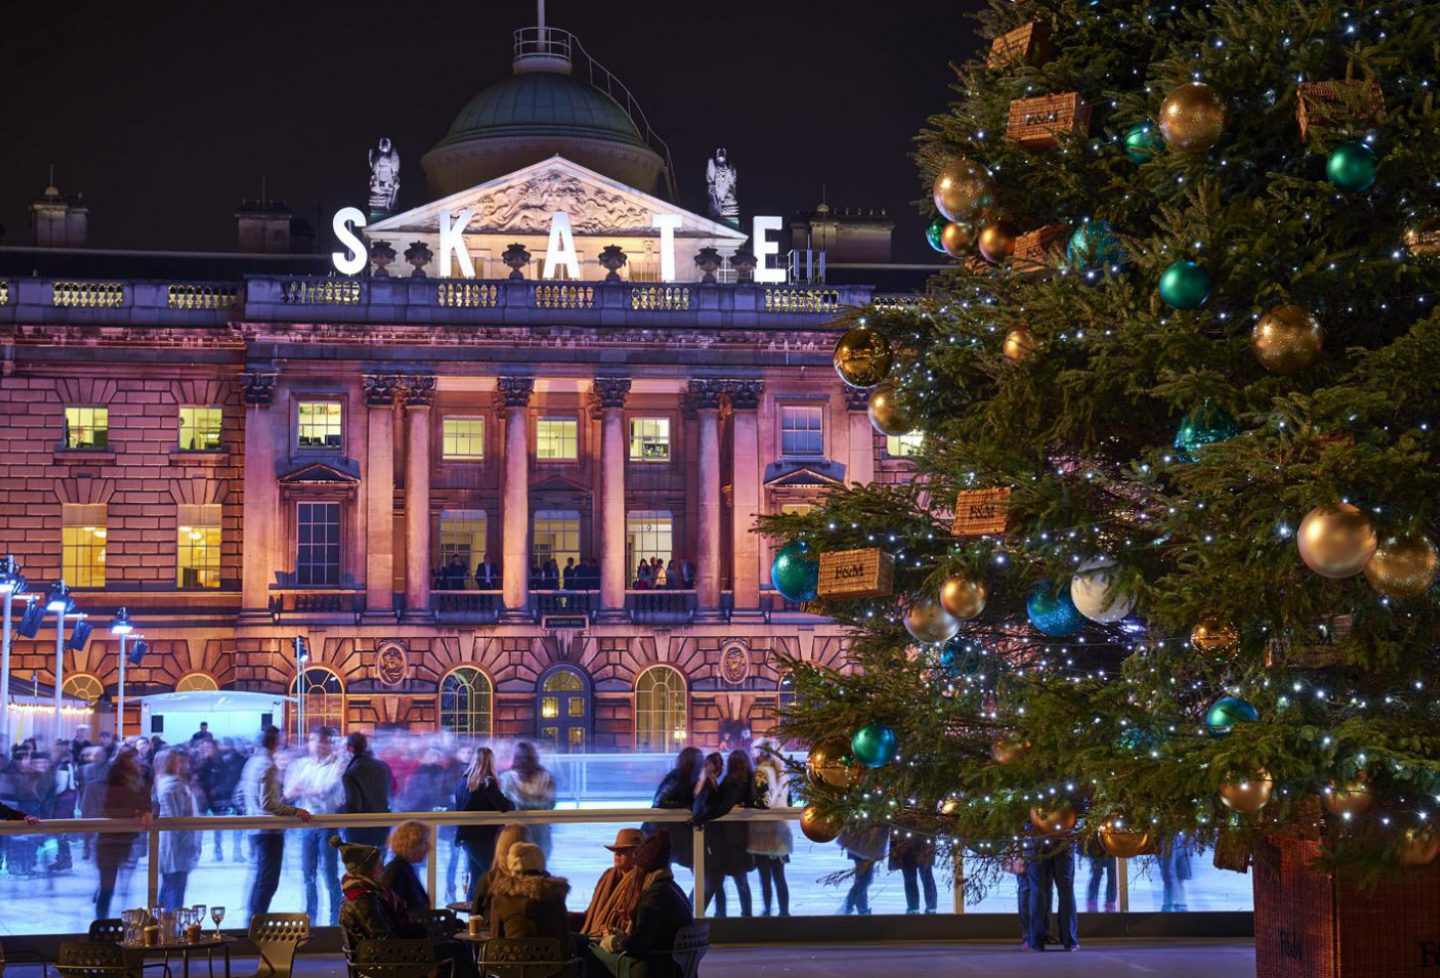 11-skate-at-somerset-house-with-fortnum-mason-c-james-bryant